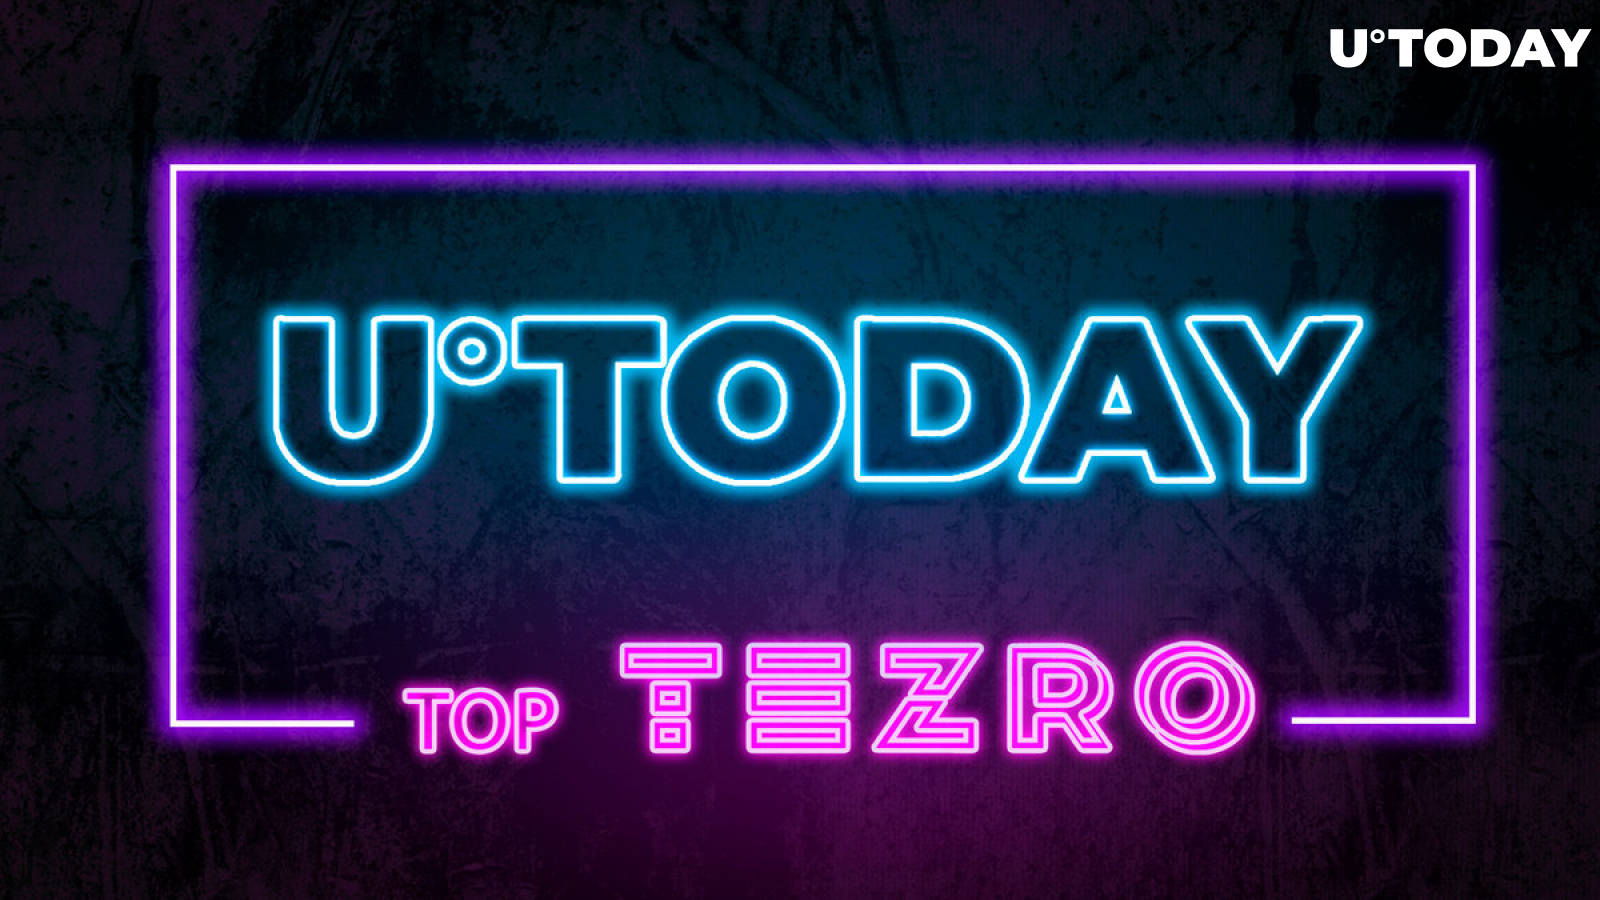 U.Today Enters Top of Best Crypto News Websites, According to Tezro